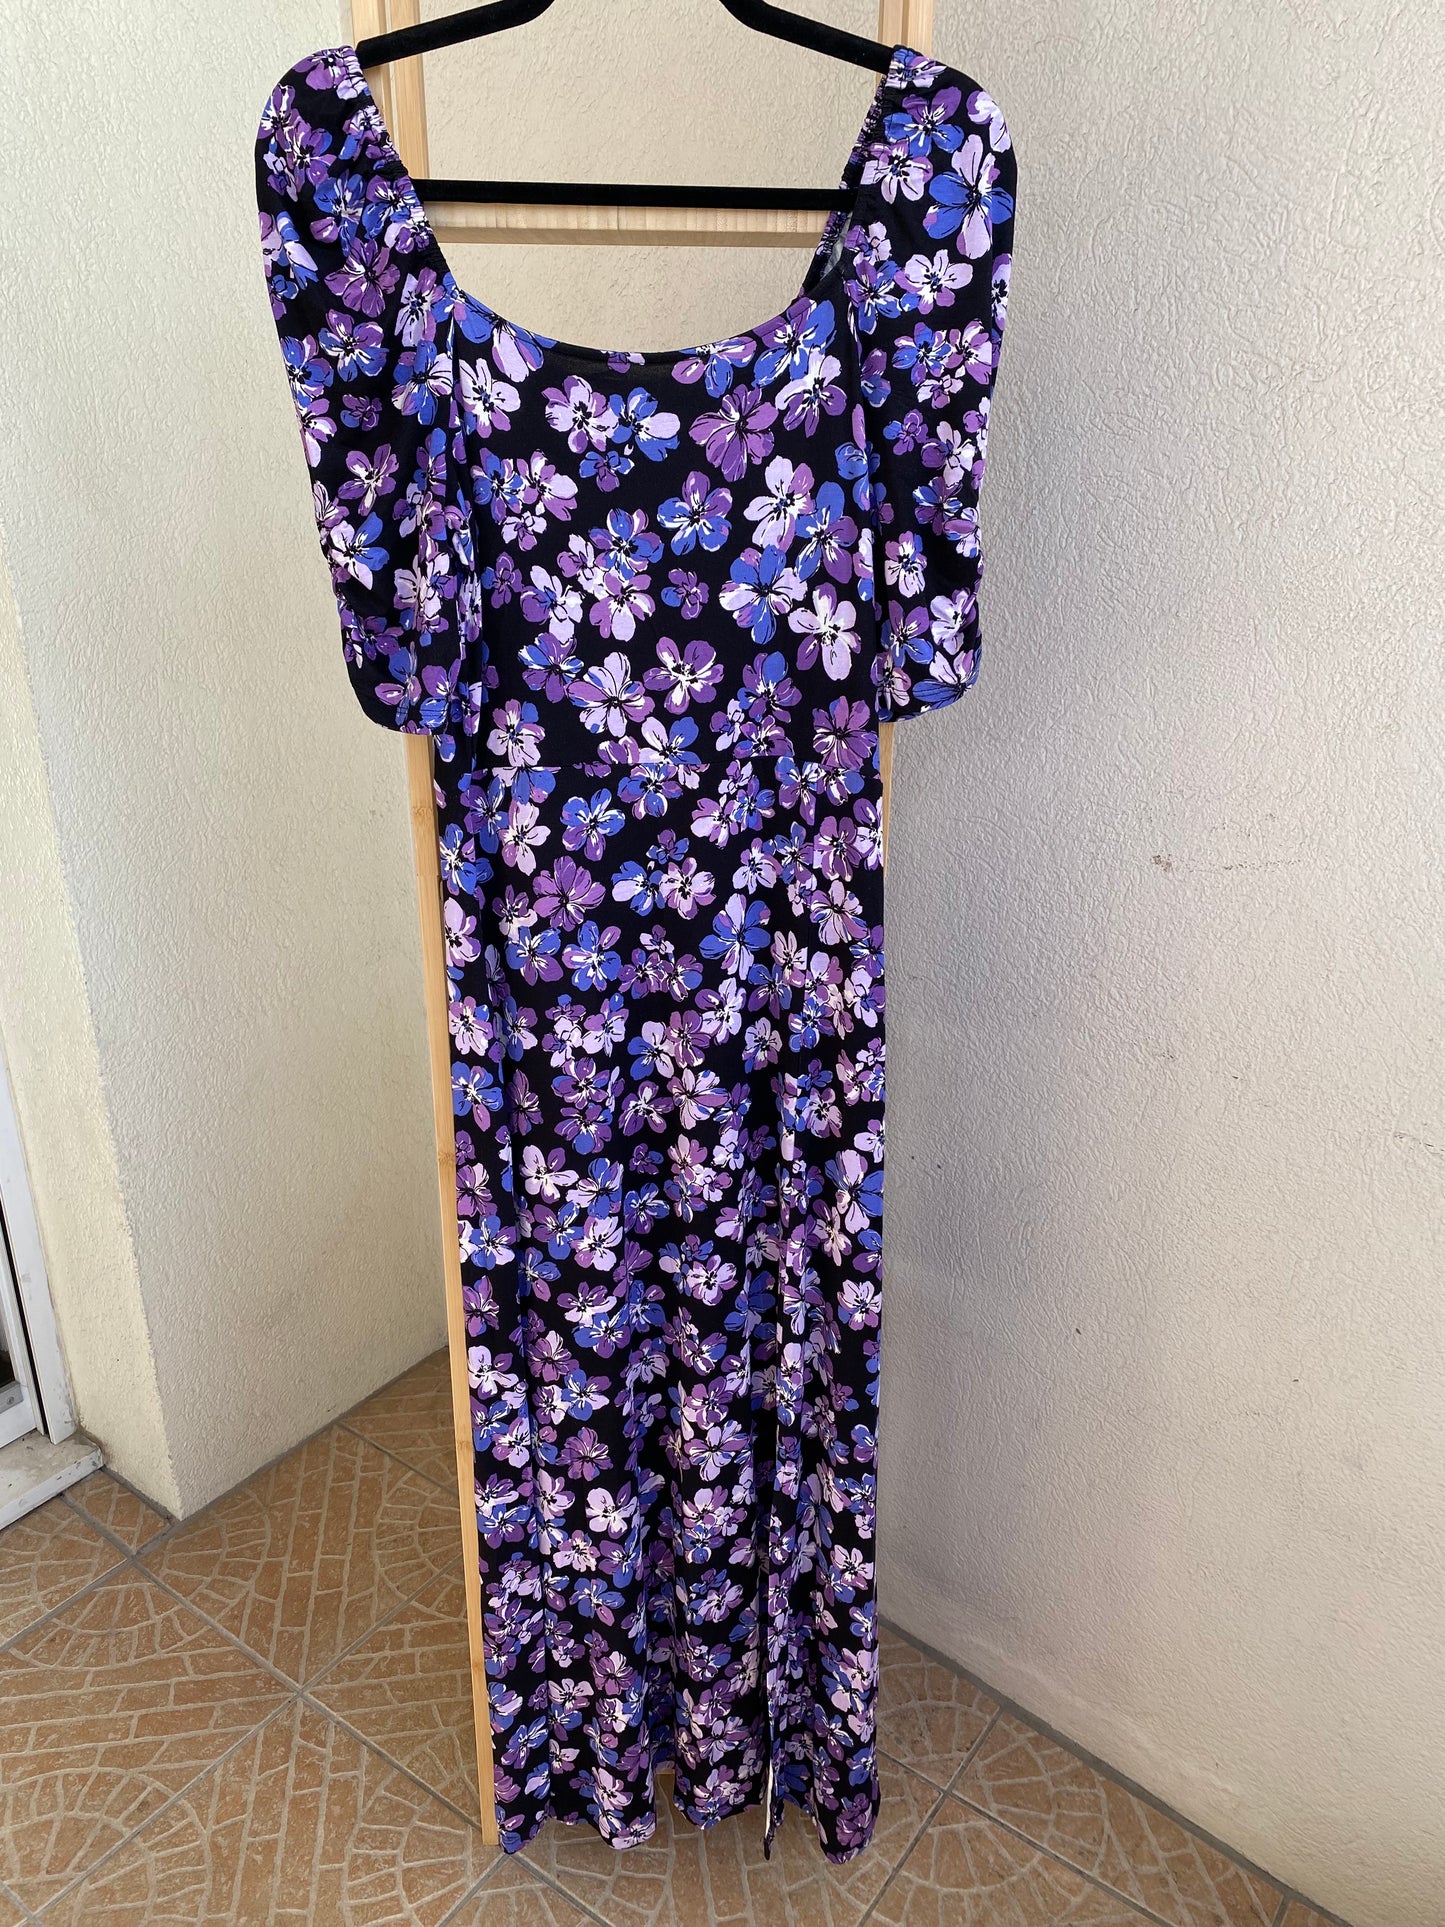 Robe longue Dorothy Perkins fleurie Taille 38/40